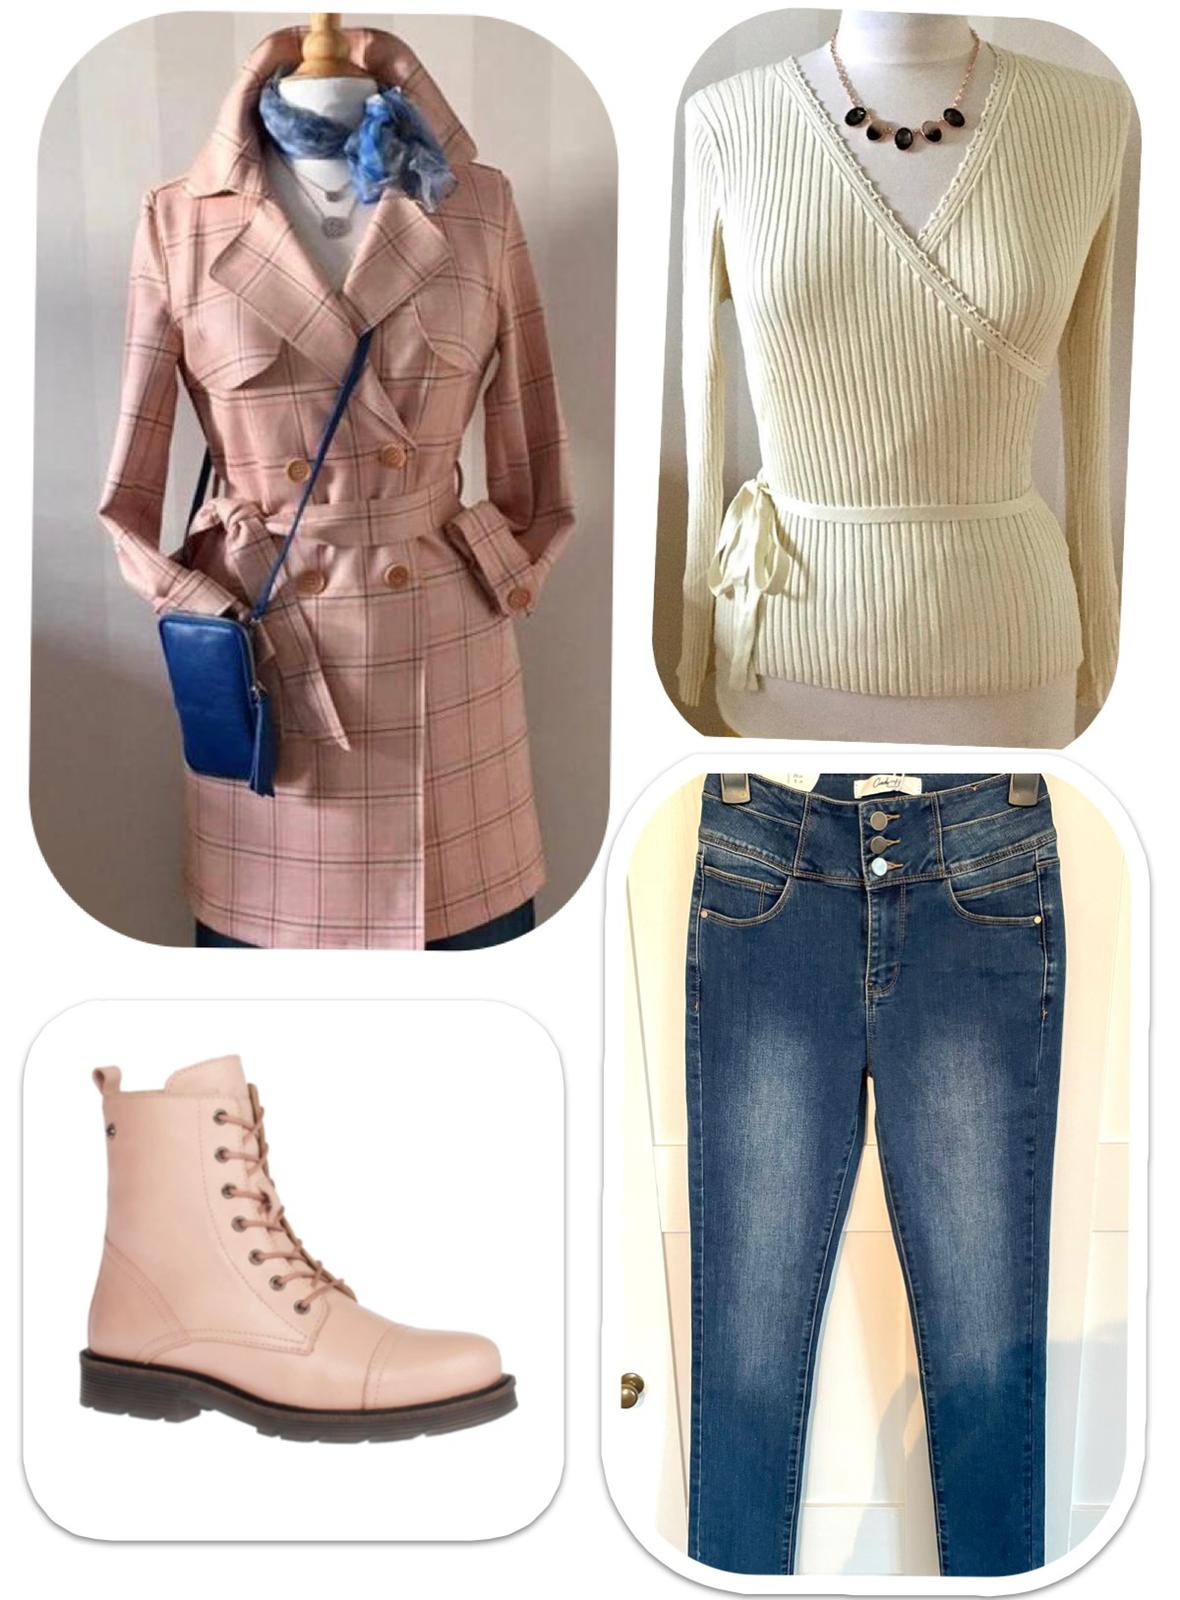 Ladies jacket, jumper, shoes and jeans available online